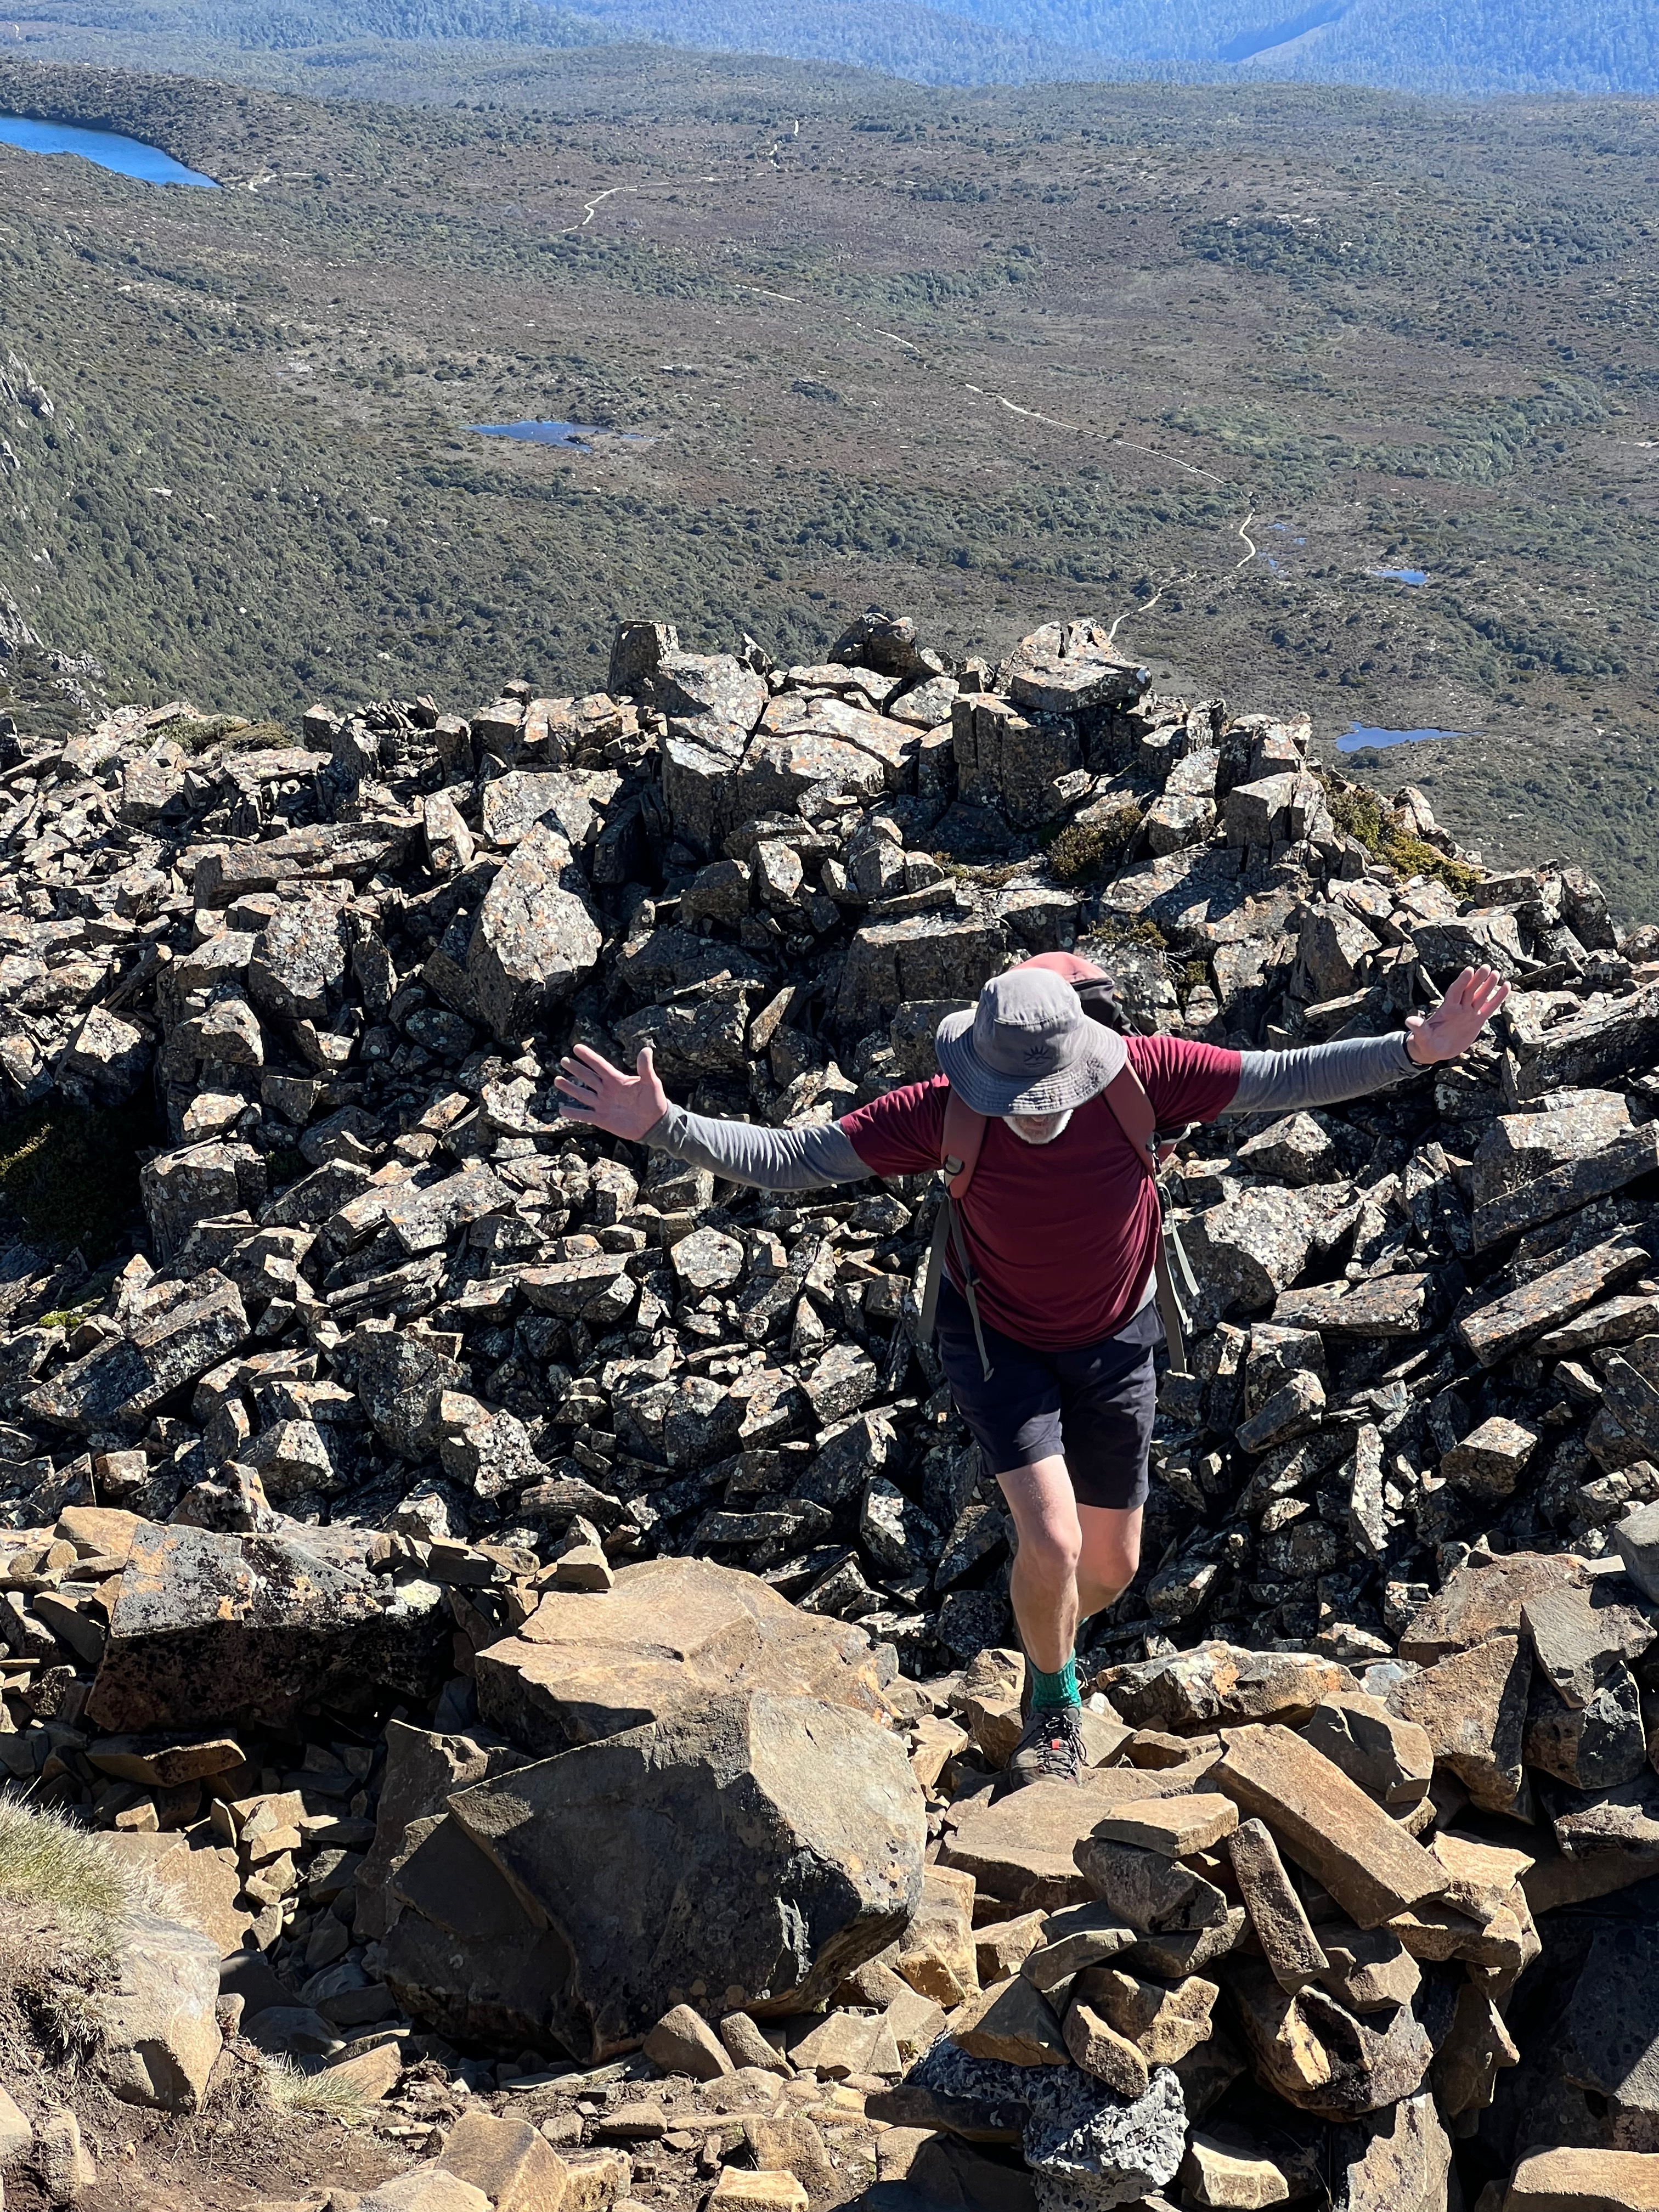 A man nearly at the top of the mountain with his hands out